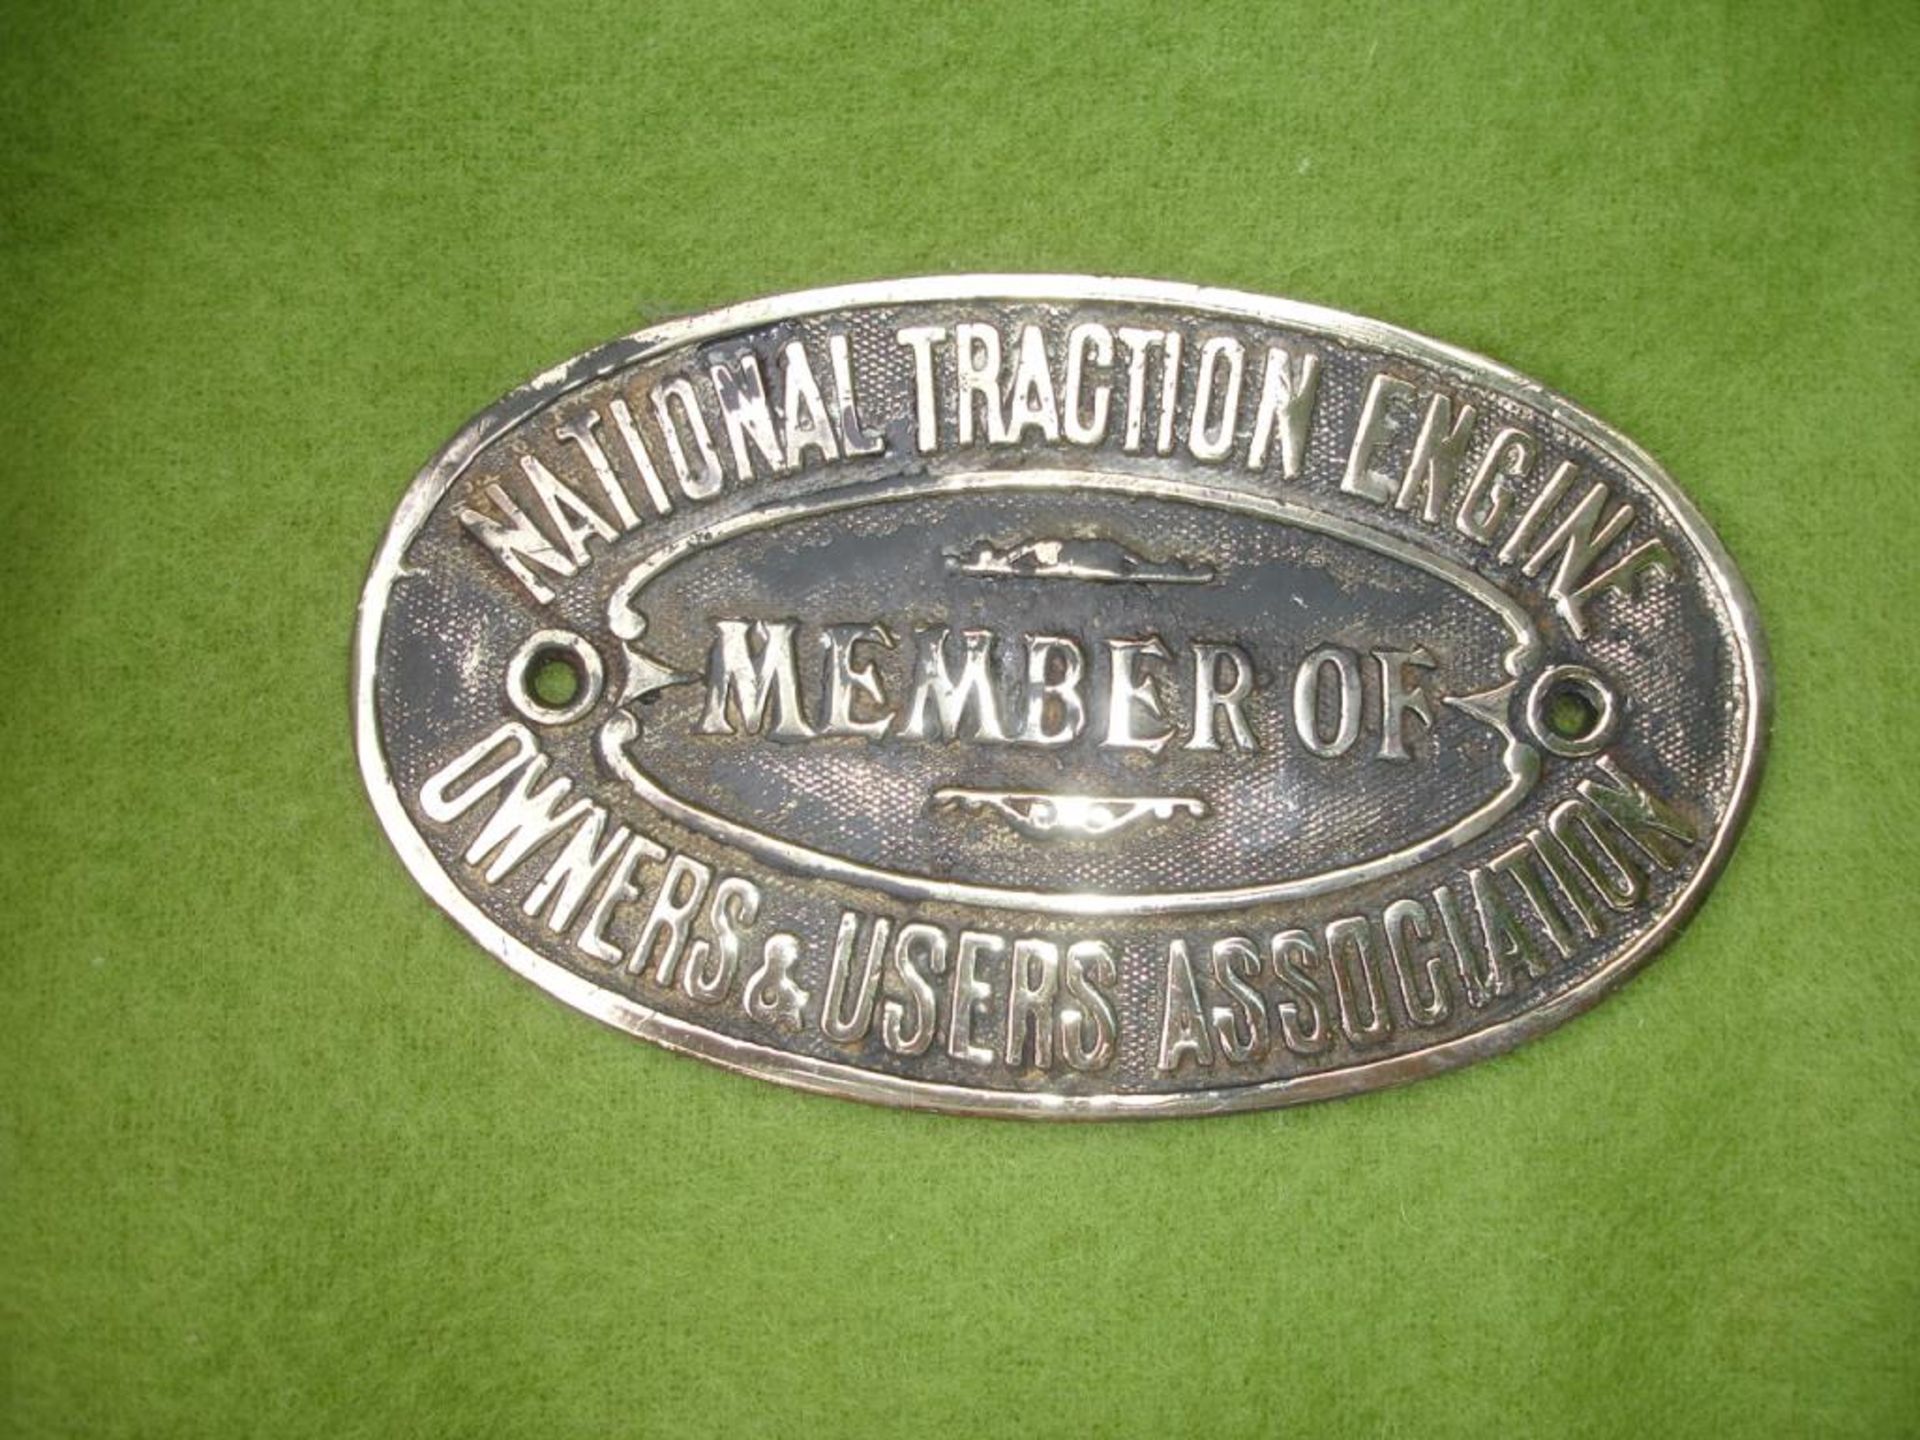 National Traction Engine Users Associate Membership bronze plate